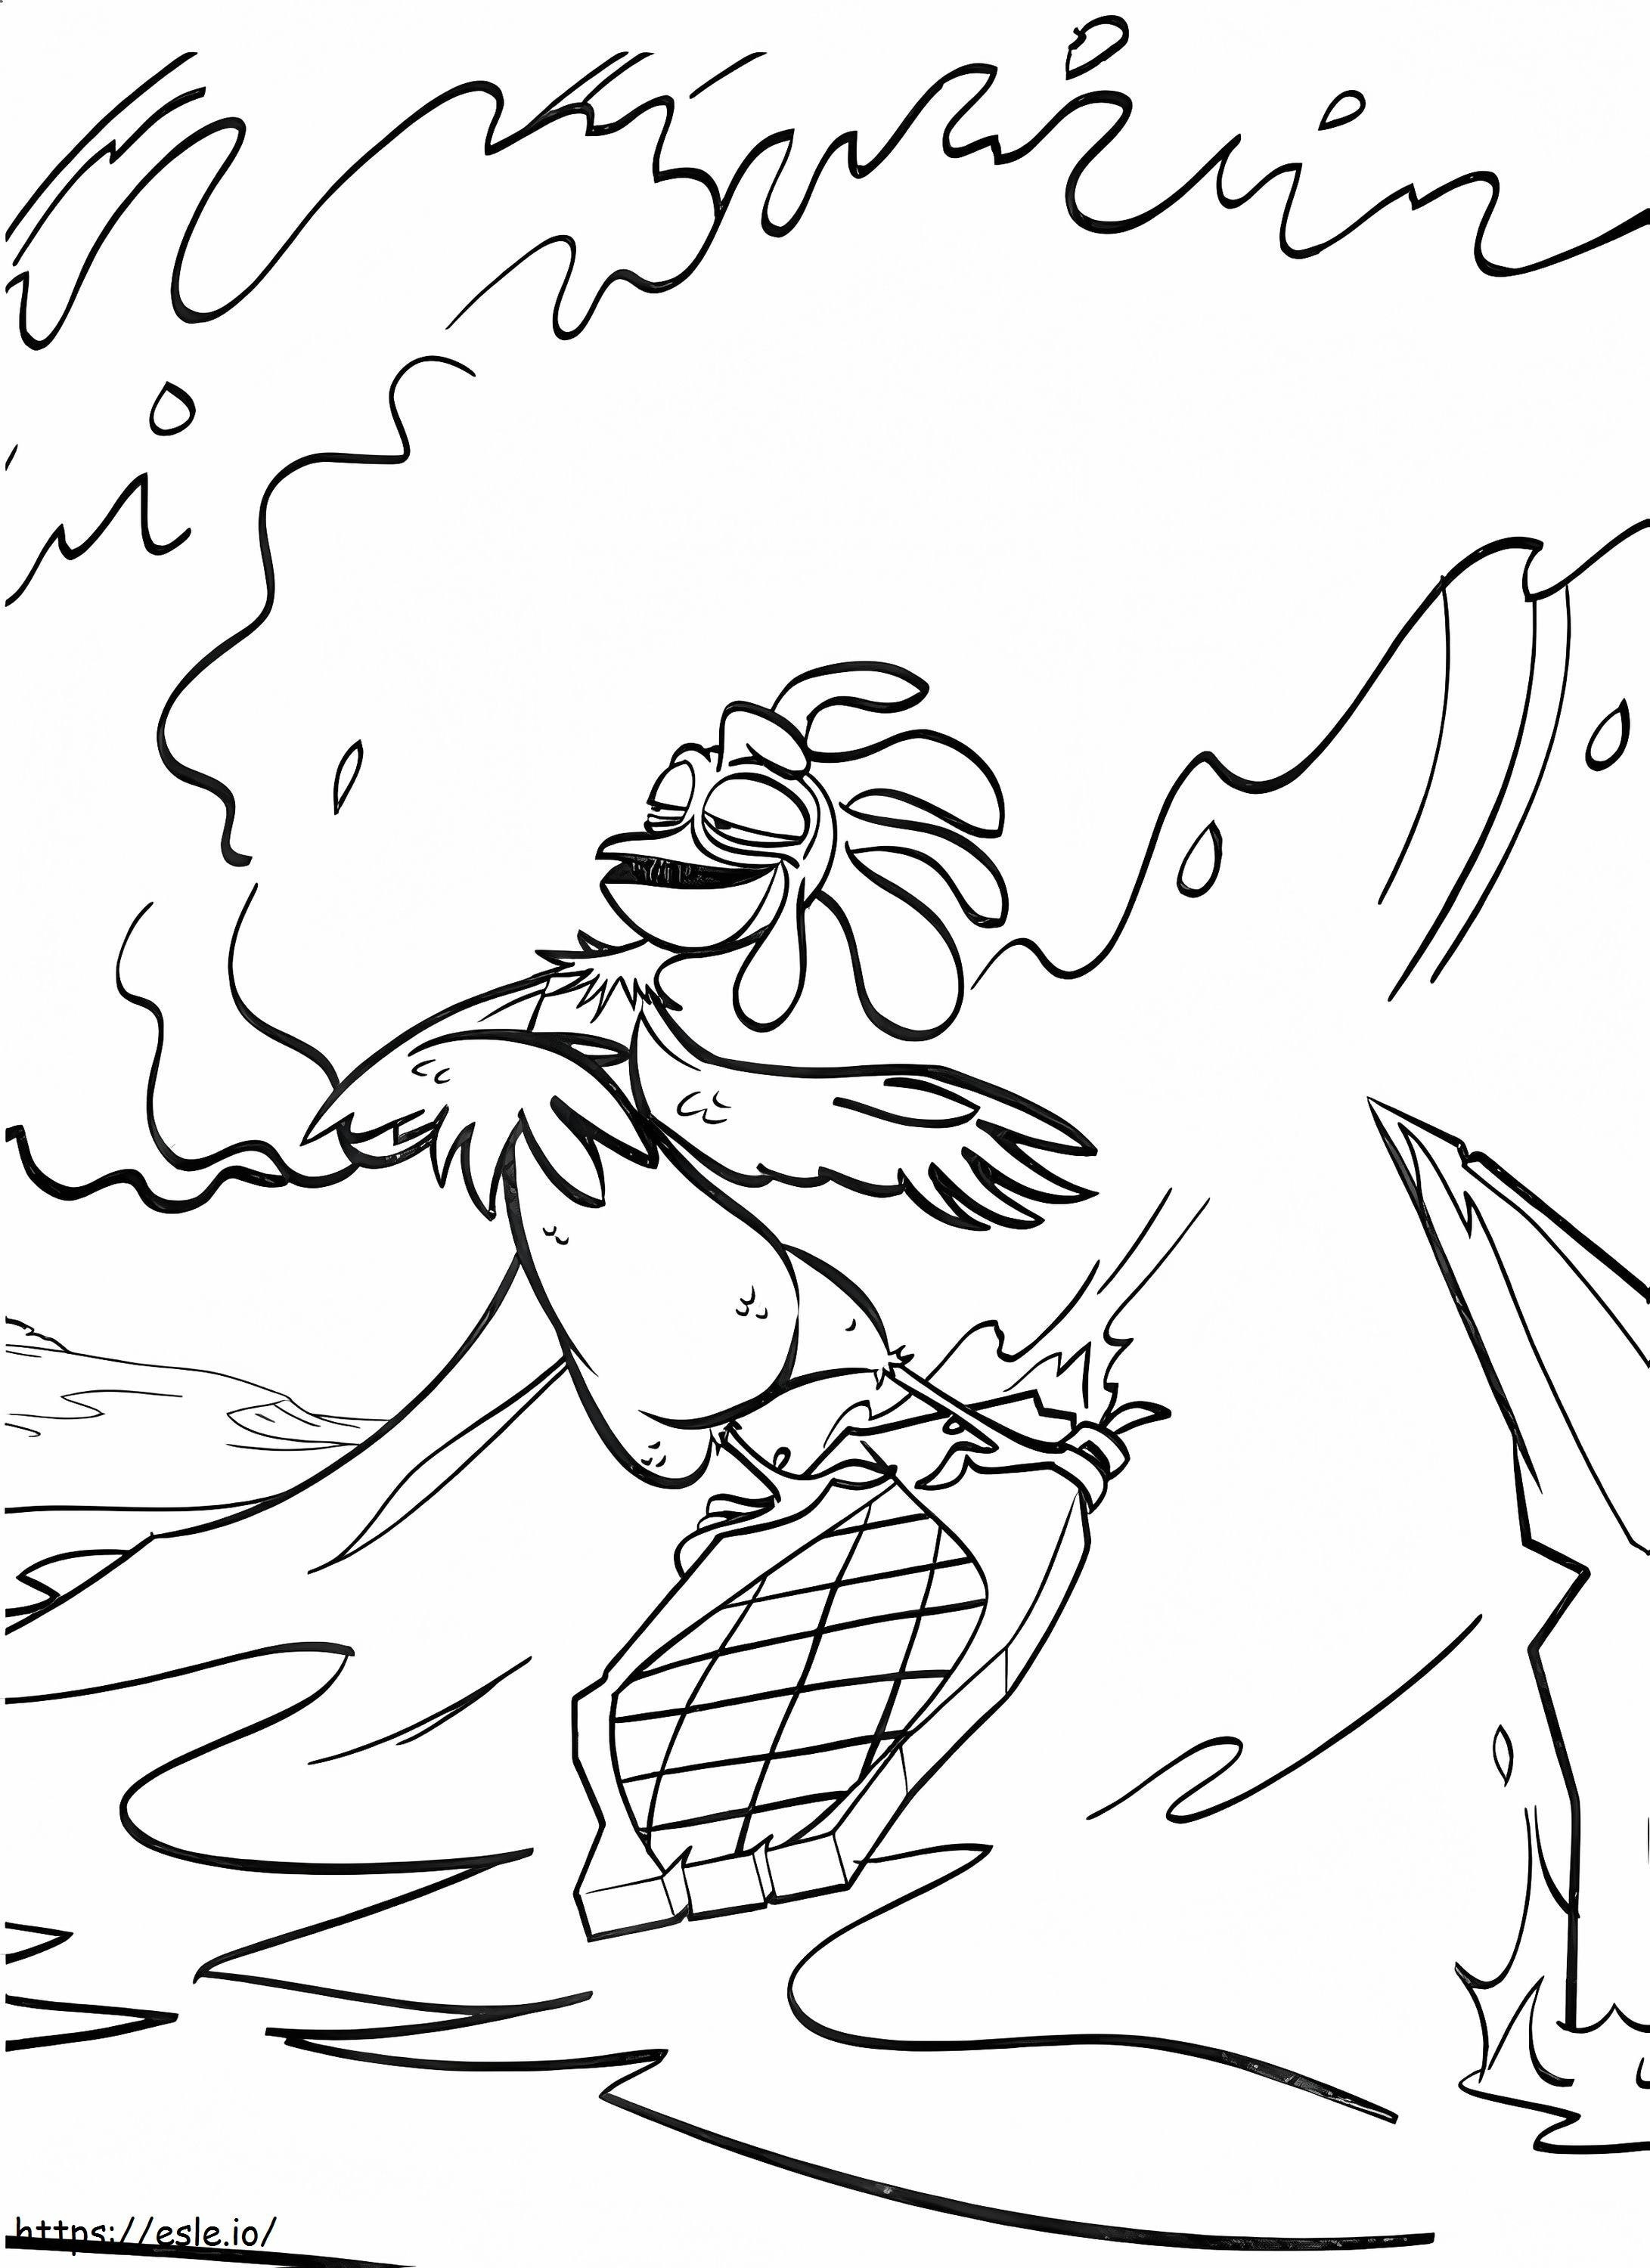 Funny Chicken Surfing coloring page